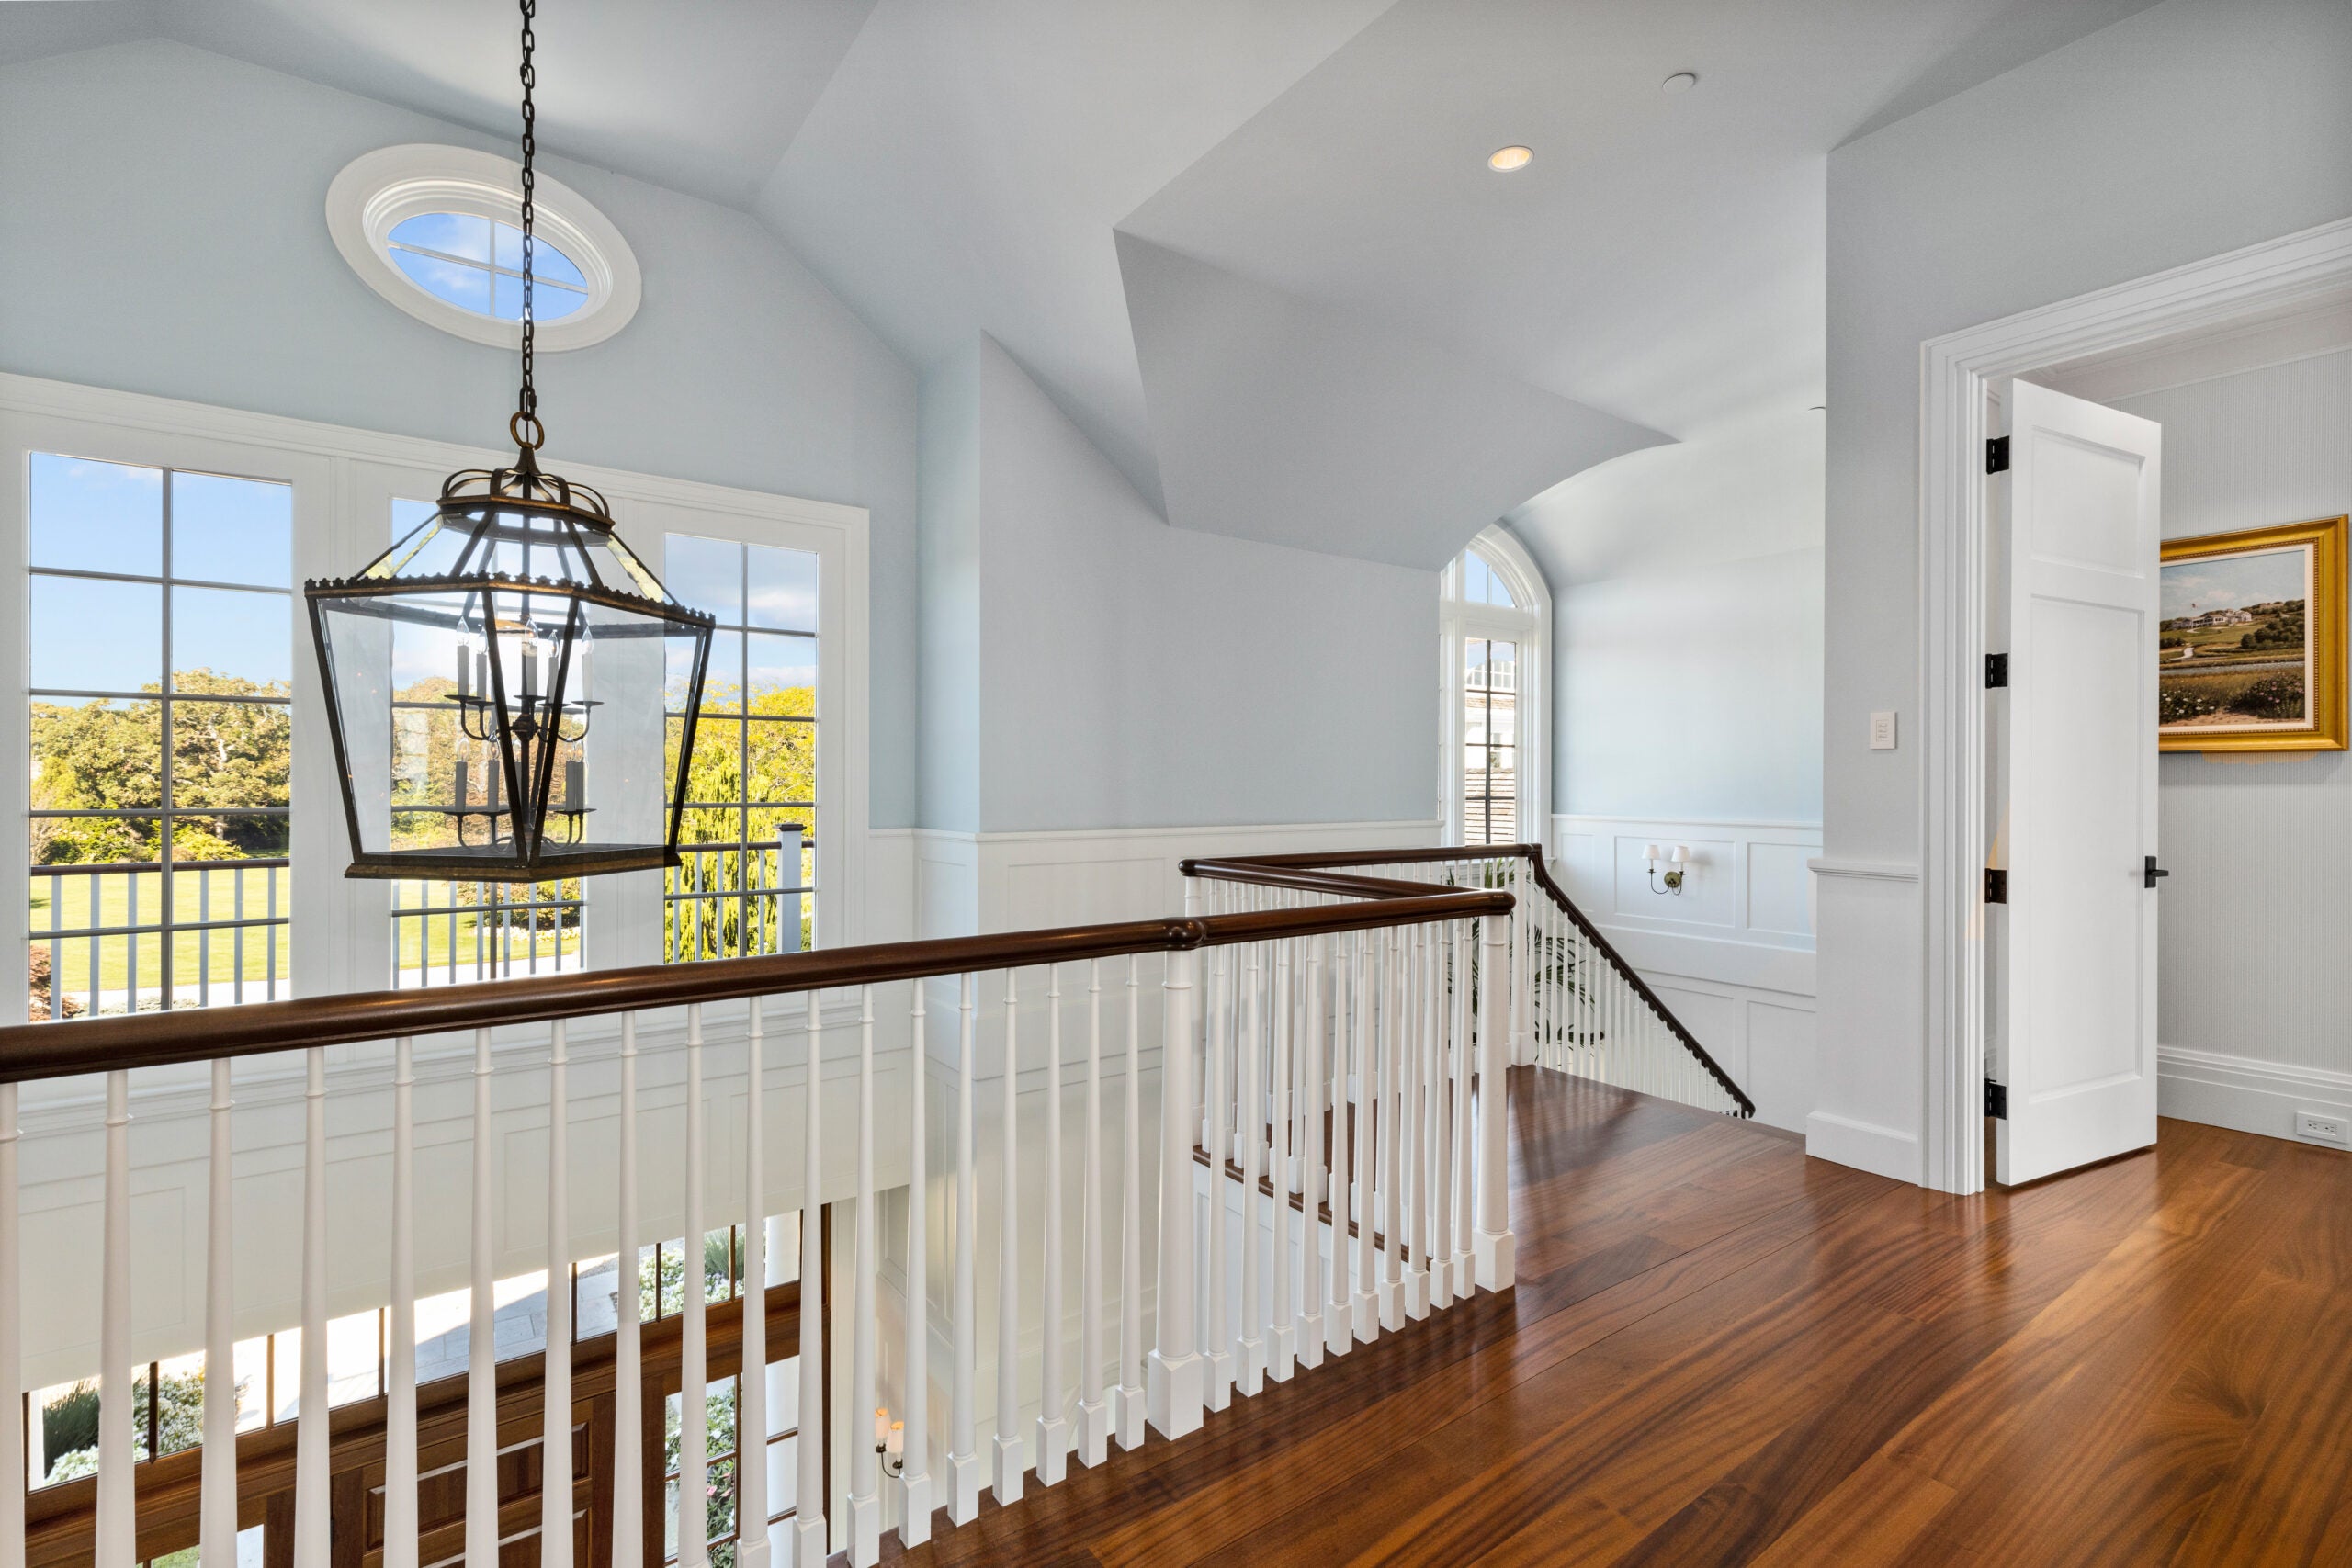 The landing off the top of the stairwell shows a hardwood floor with lots of swirls and a high gloss. A big lantern hangs over the space. The balusters are myriad and white, but the railings are a dark wood. The railing looks over to an oval window and an expansive three-unit window overlooking a deck and a yard with numerous trees. The walls of this space are gray and there is board-and-batten wainscoting lining the stairway.